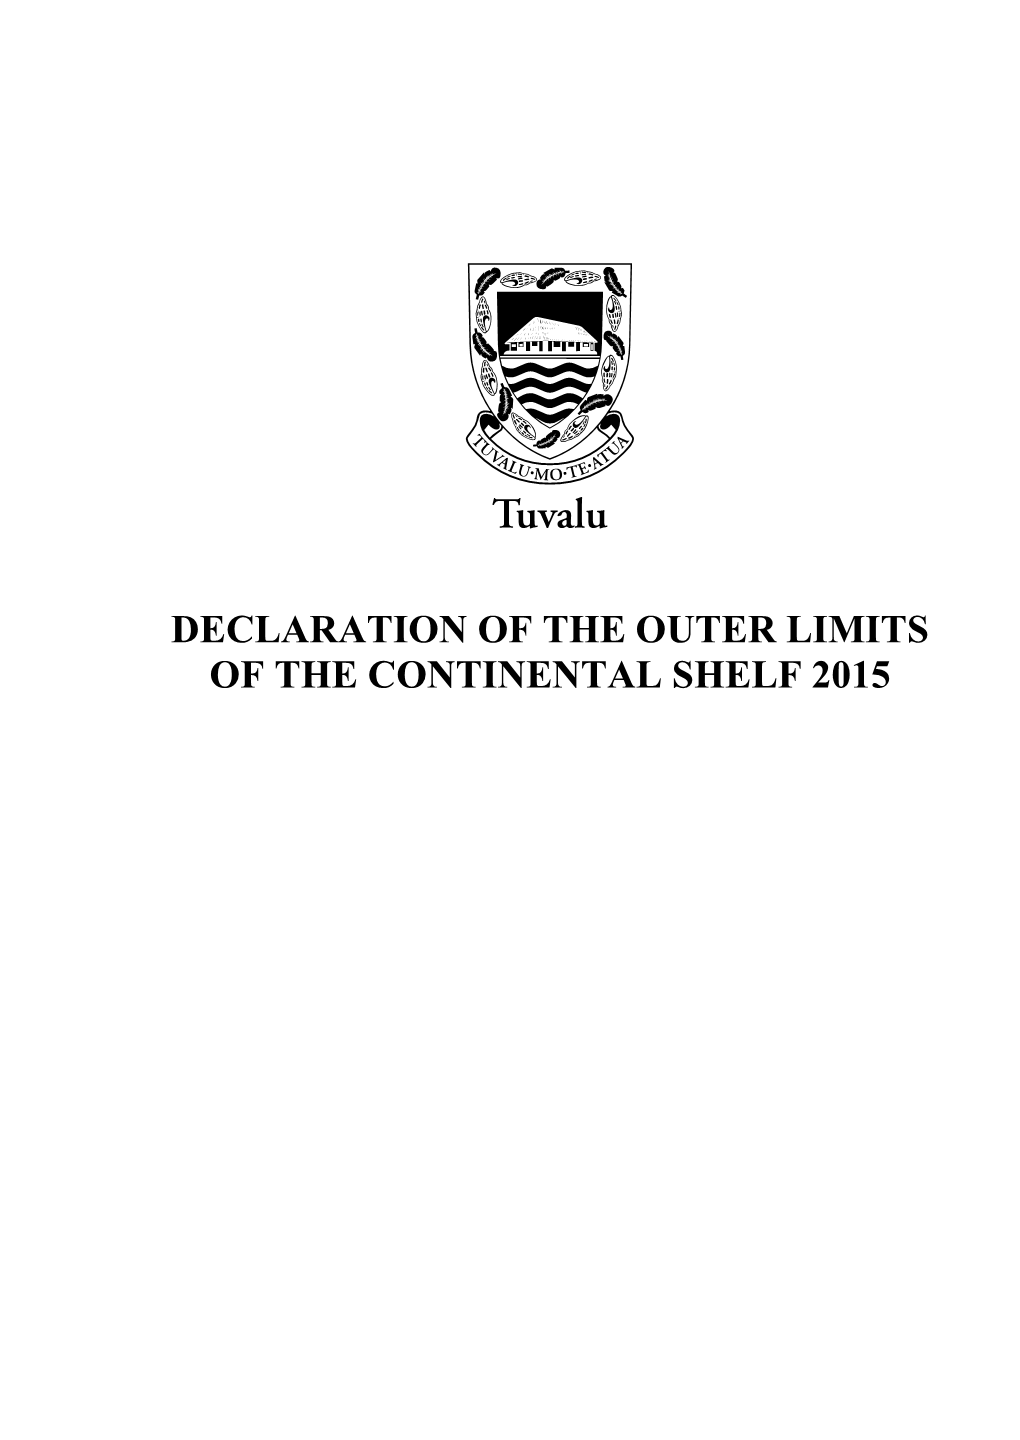 Declaration of the Outer Limits of the Continental Shelf 2015